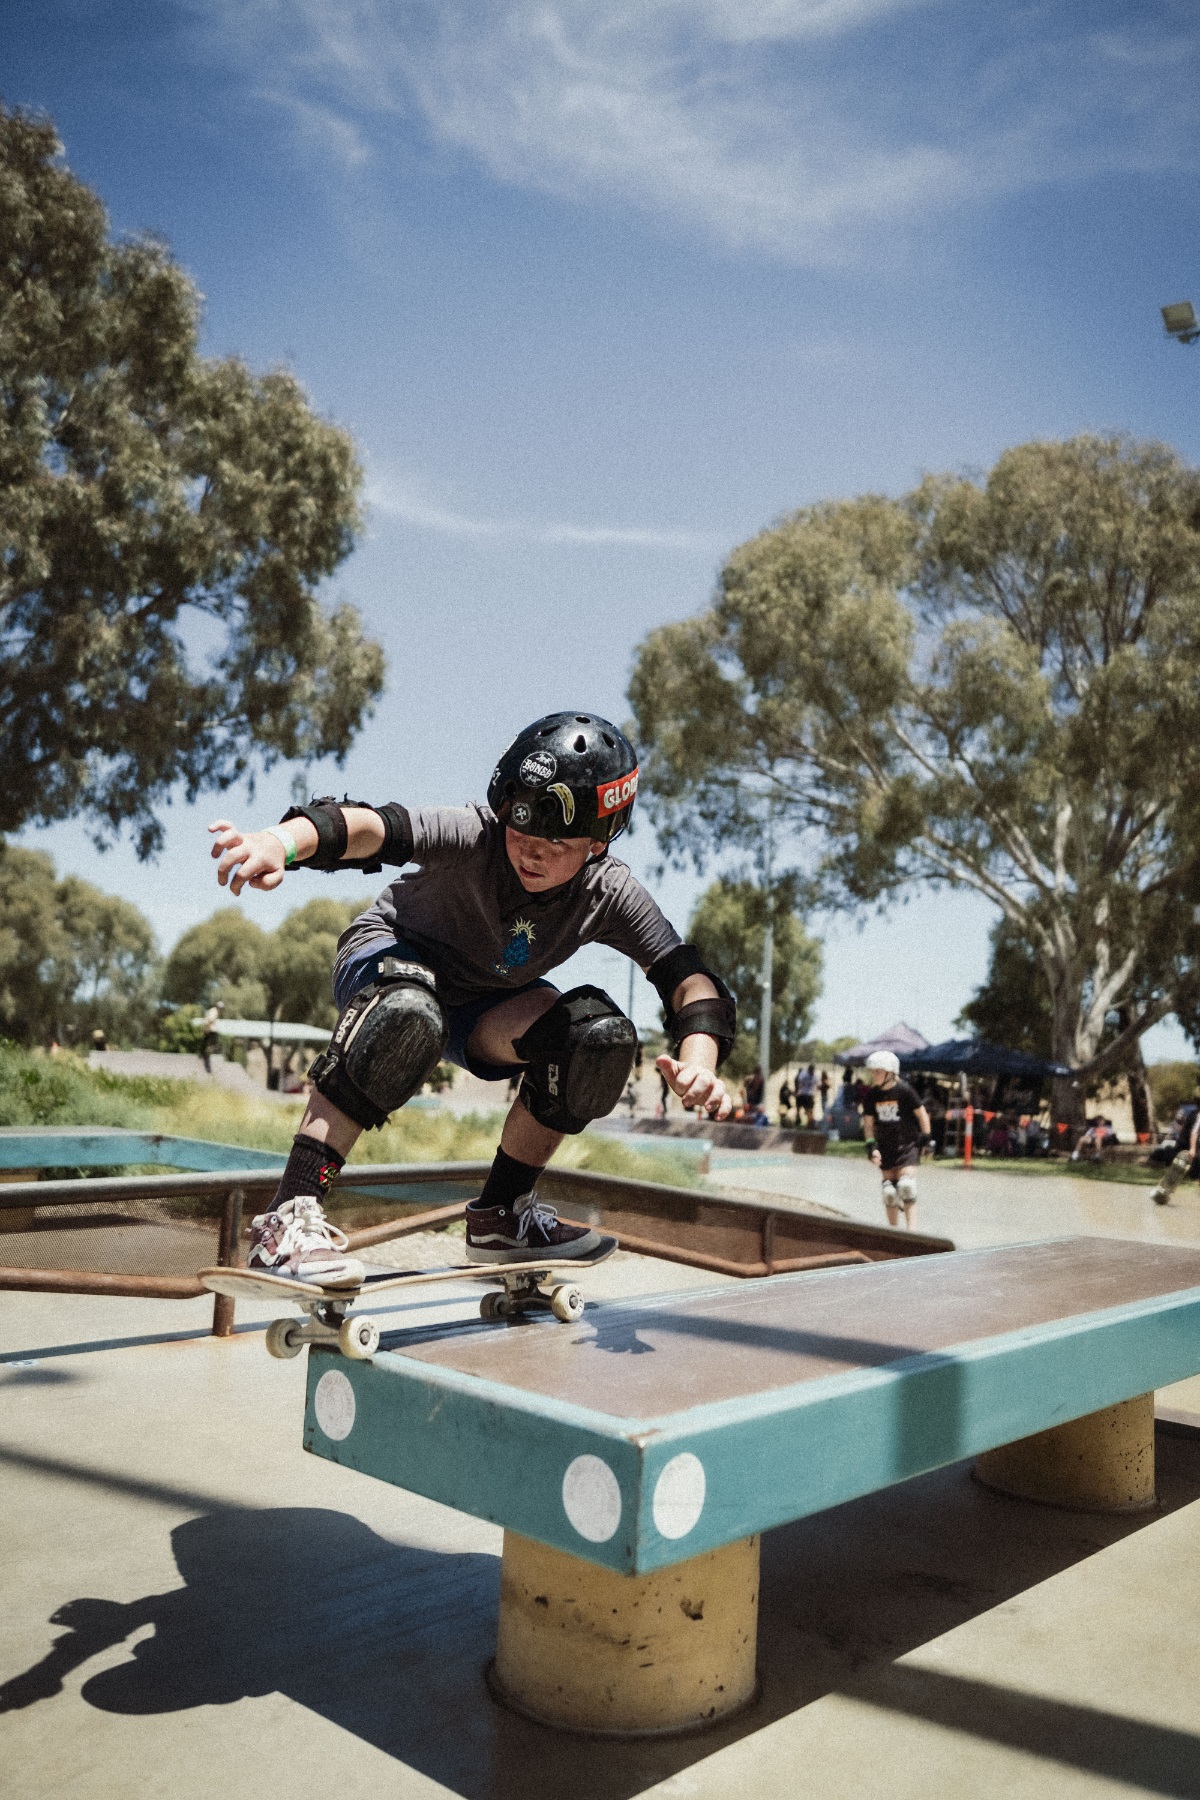 A young skater grinds his skateboard along the coping.